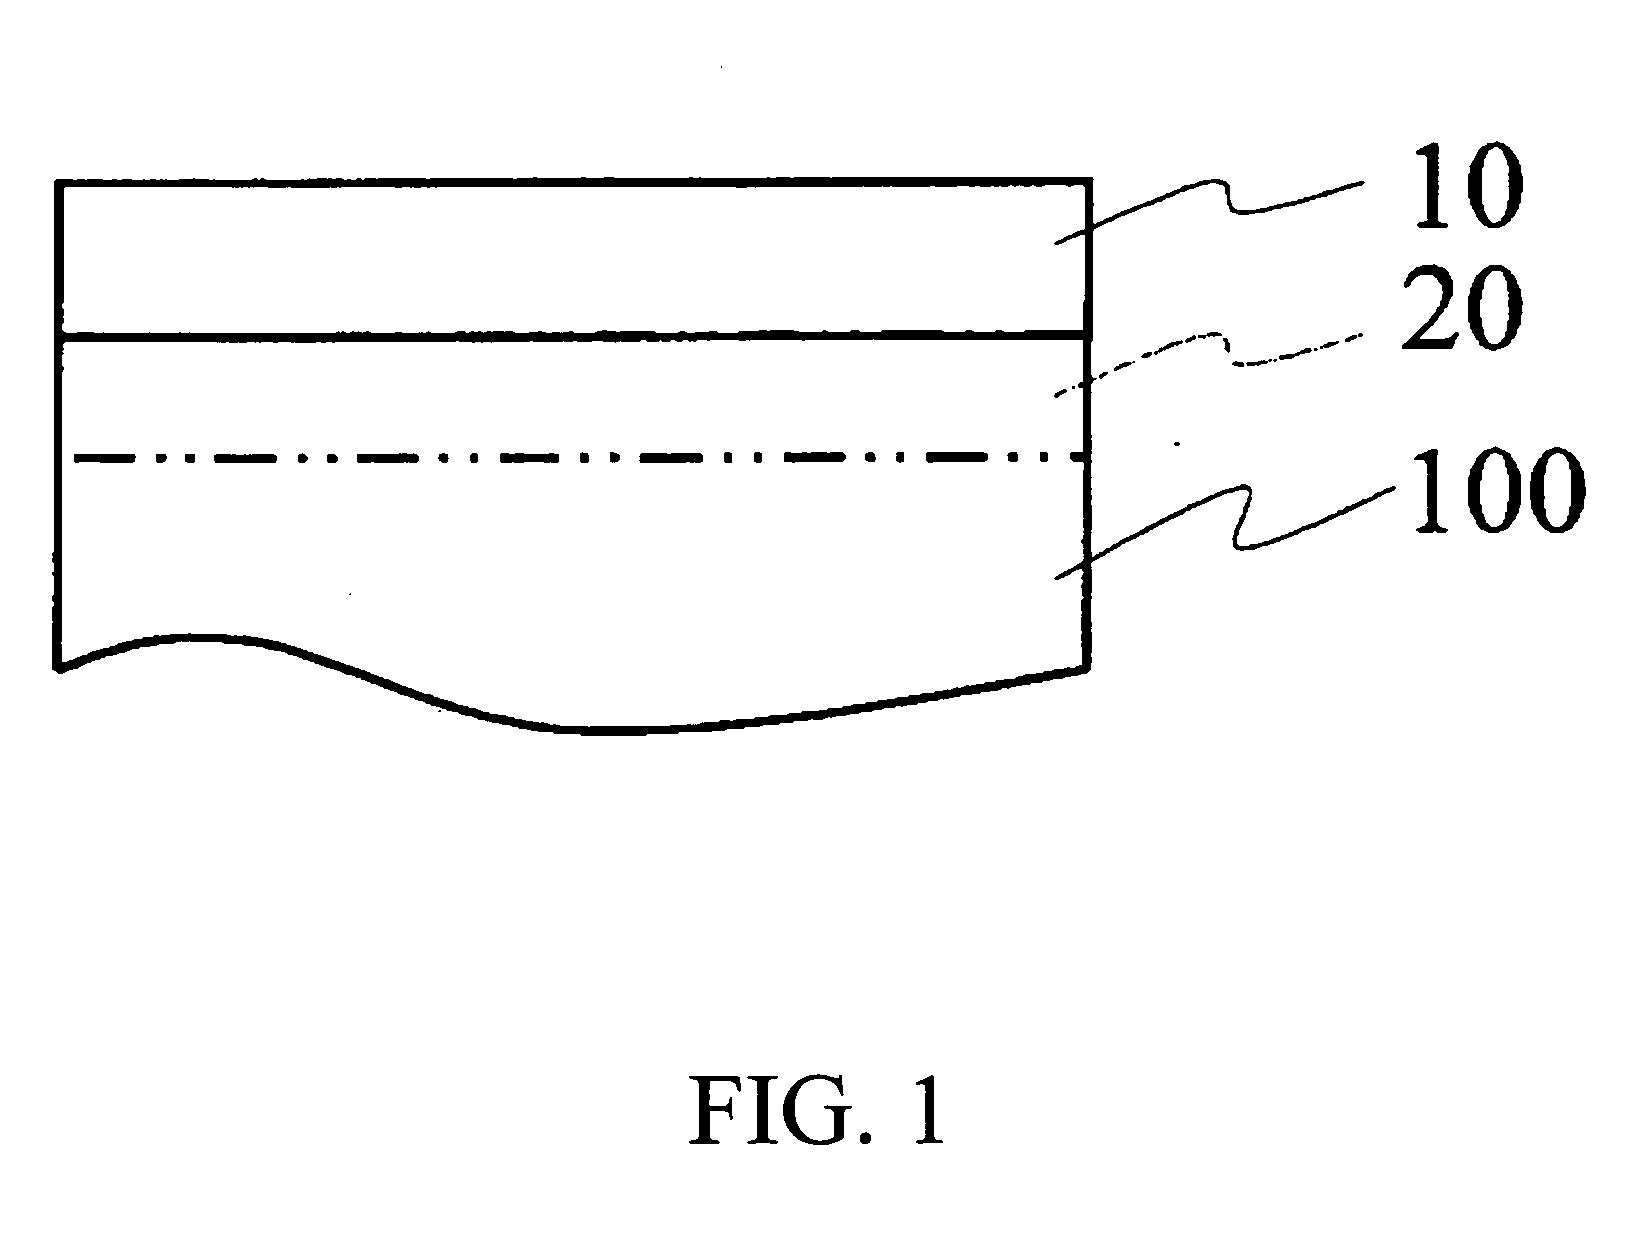 Method and apparatus for producing photocatalyst